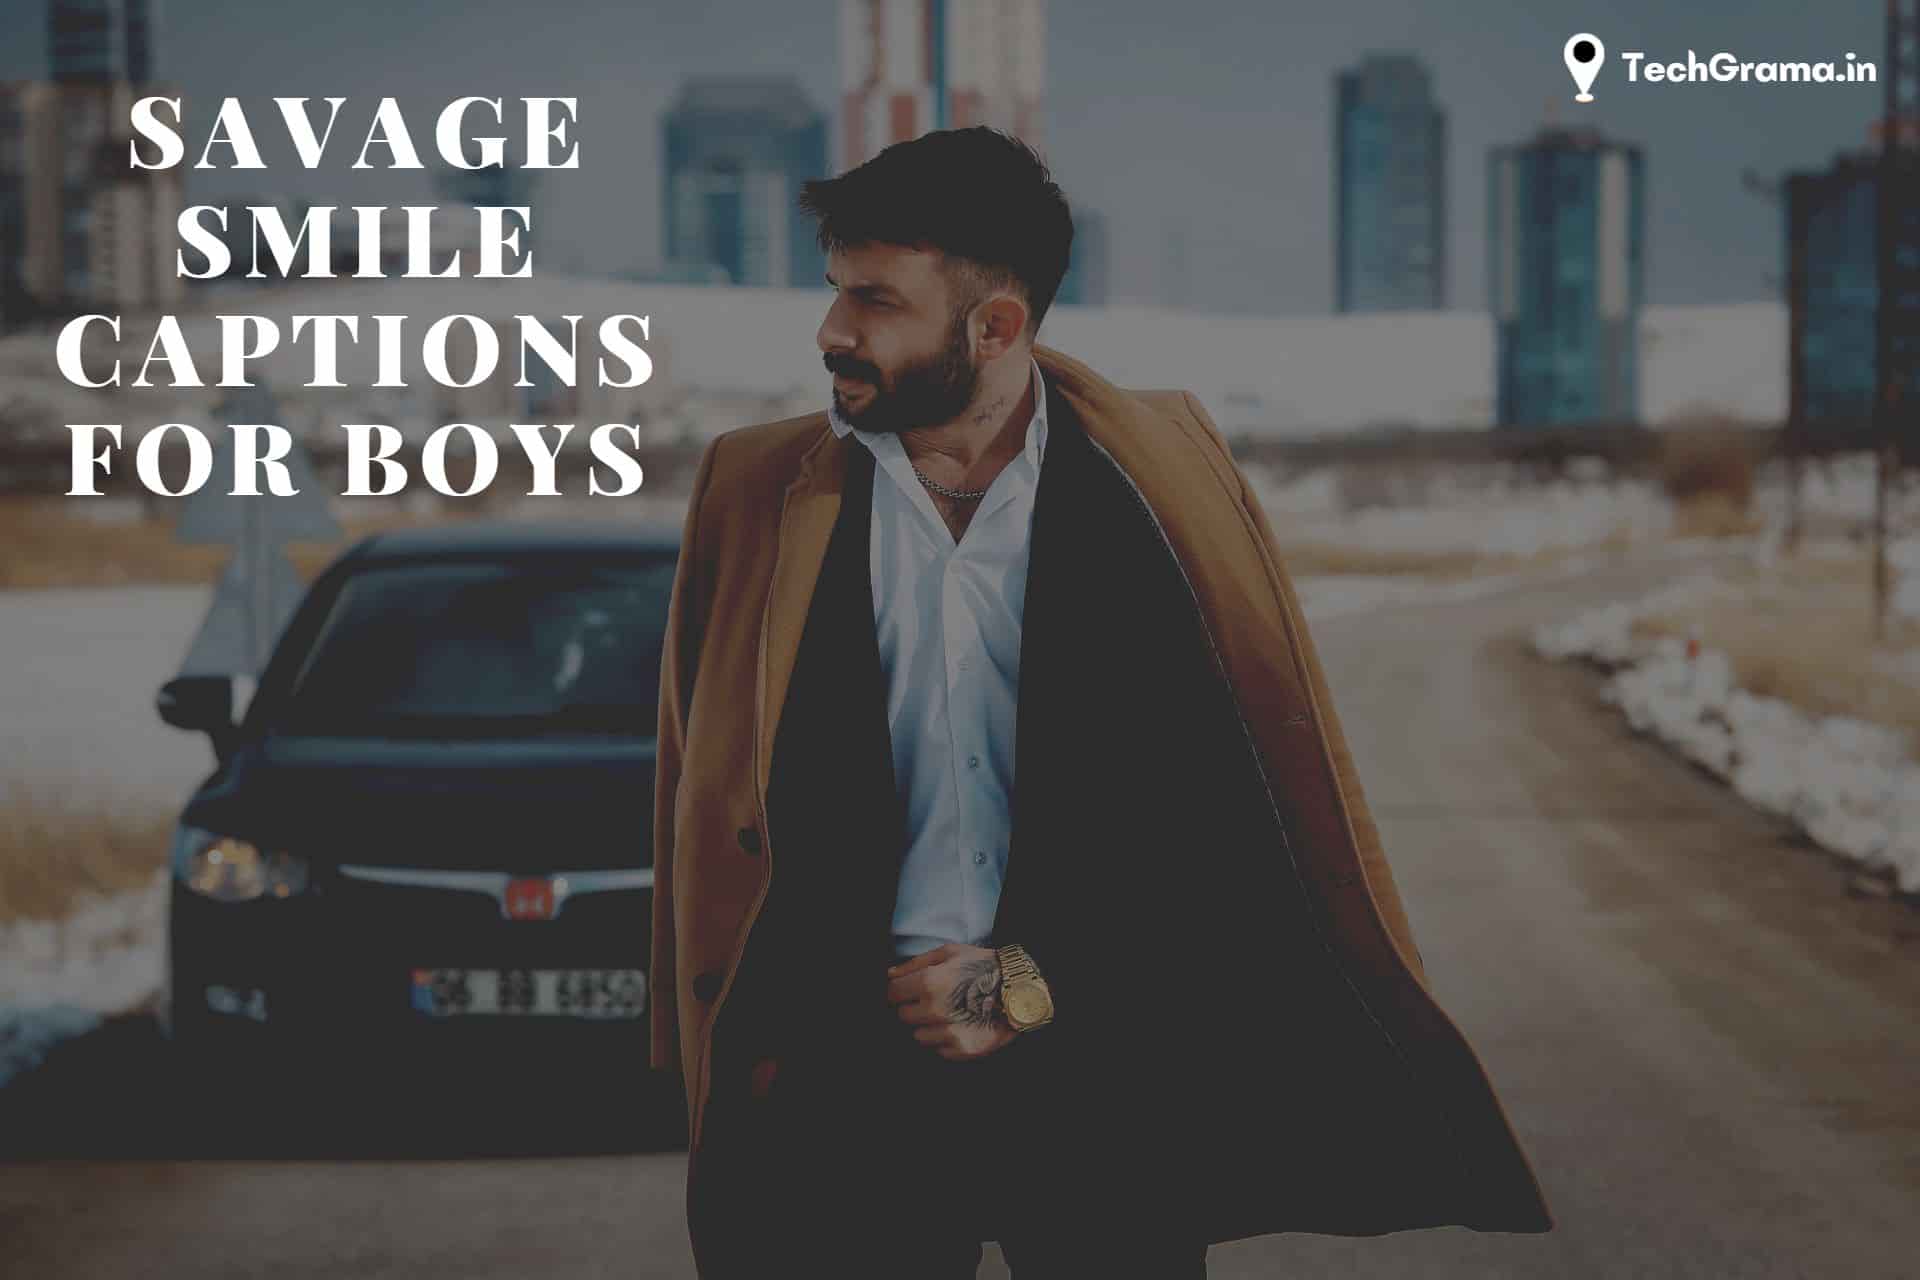 Best Smile Captions For Boys, Savage Smile Captions For Boys, Caption For Killer Smile, Attitude Smile Captions For Instagram For Boy, Instagram Captions For Boys Smile, Smile Captions For Instagram For Boy, Boy Smile Captions For Instagram, Happy Captions For Instagram For Boys, Instagram Captions For Guys Smiling.